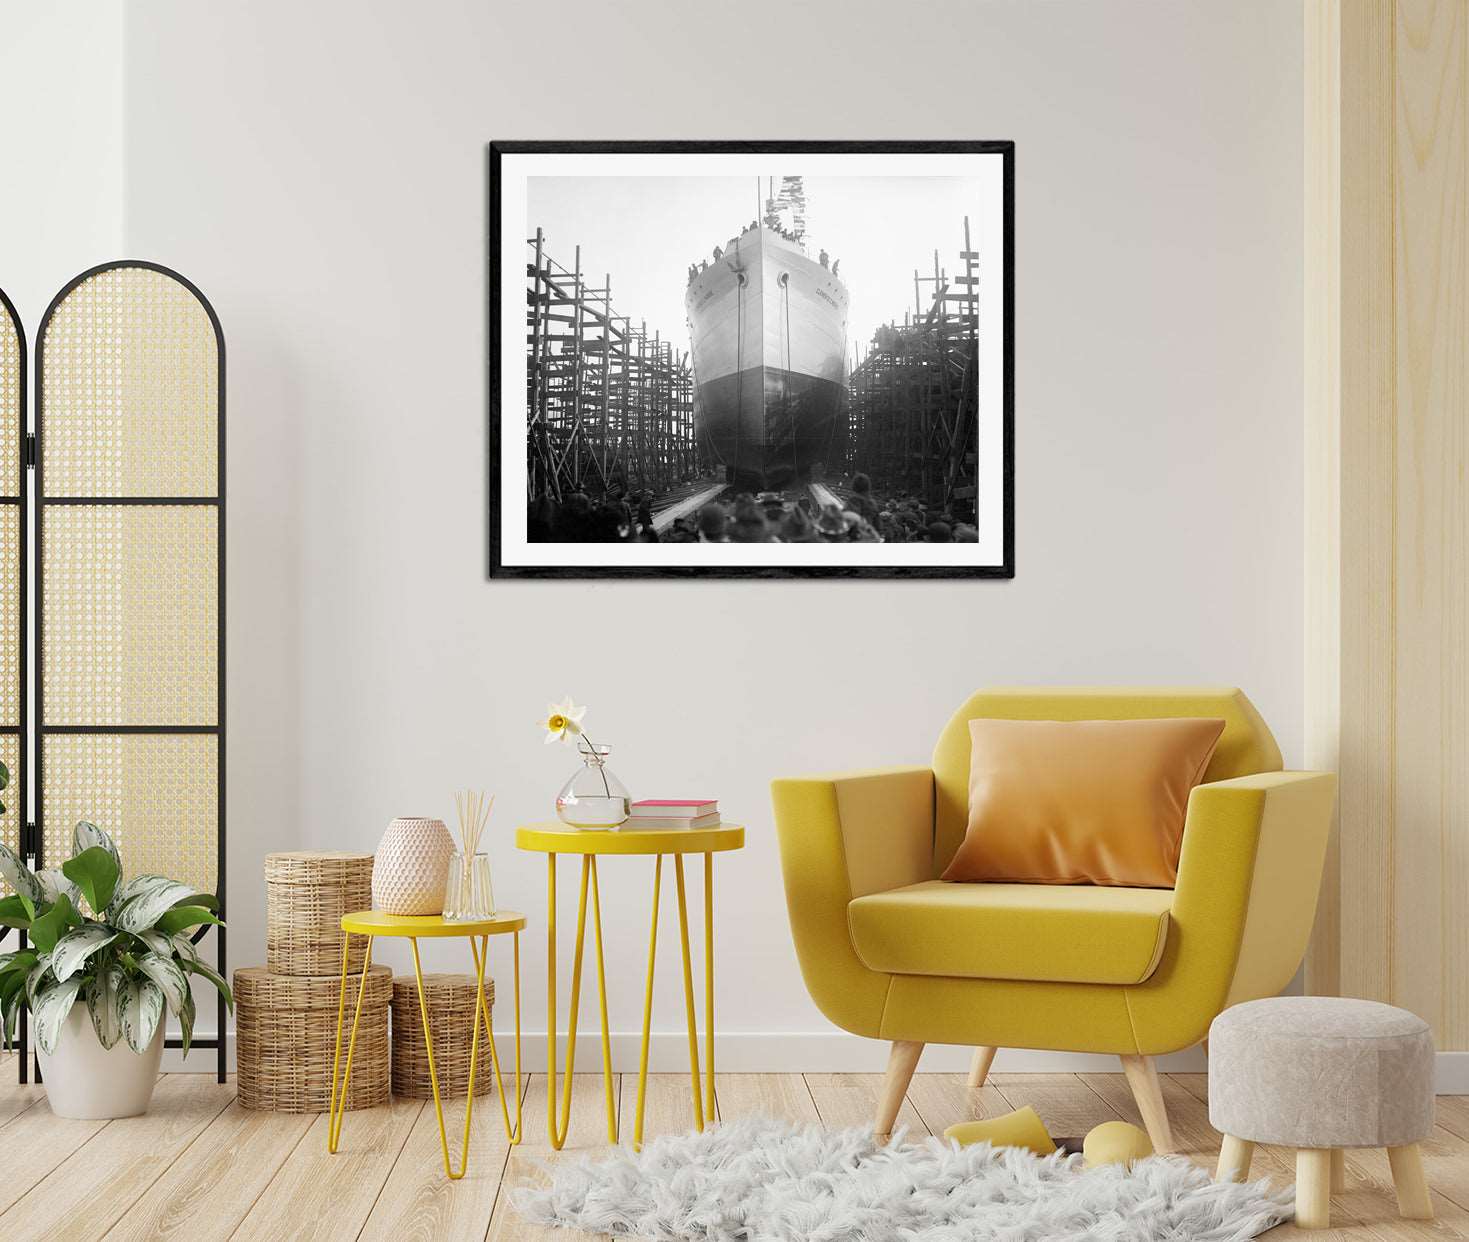 A room with yellow furniture and a framed paper print of a vintage photograph of a ship launch on the wall